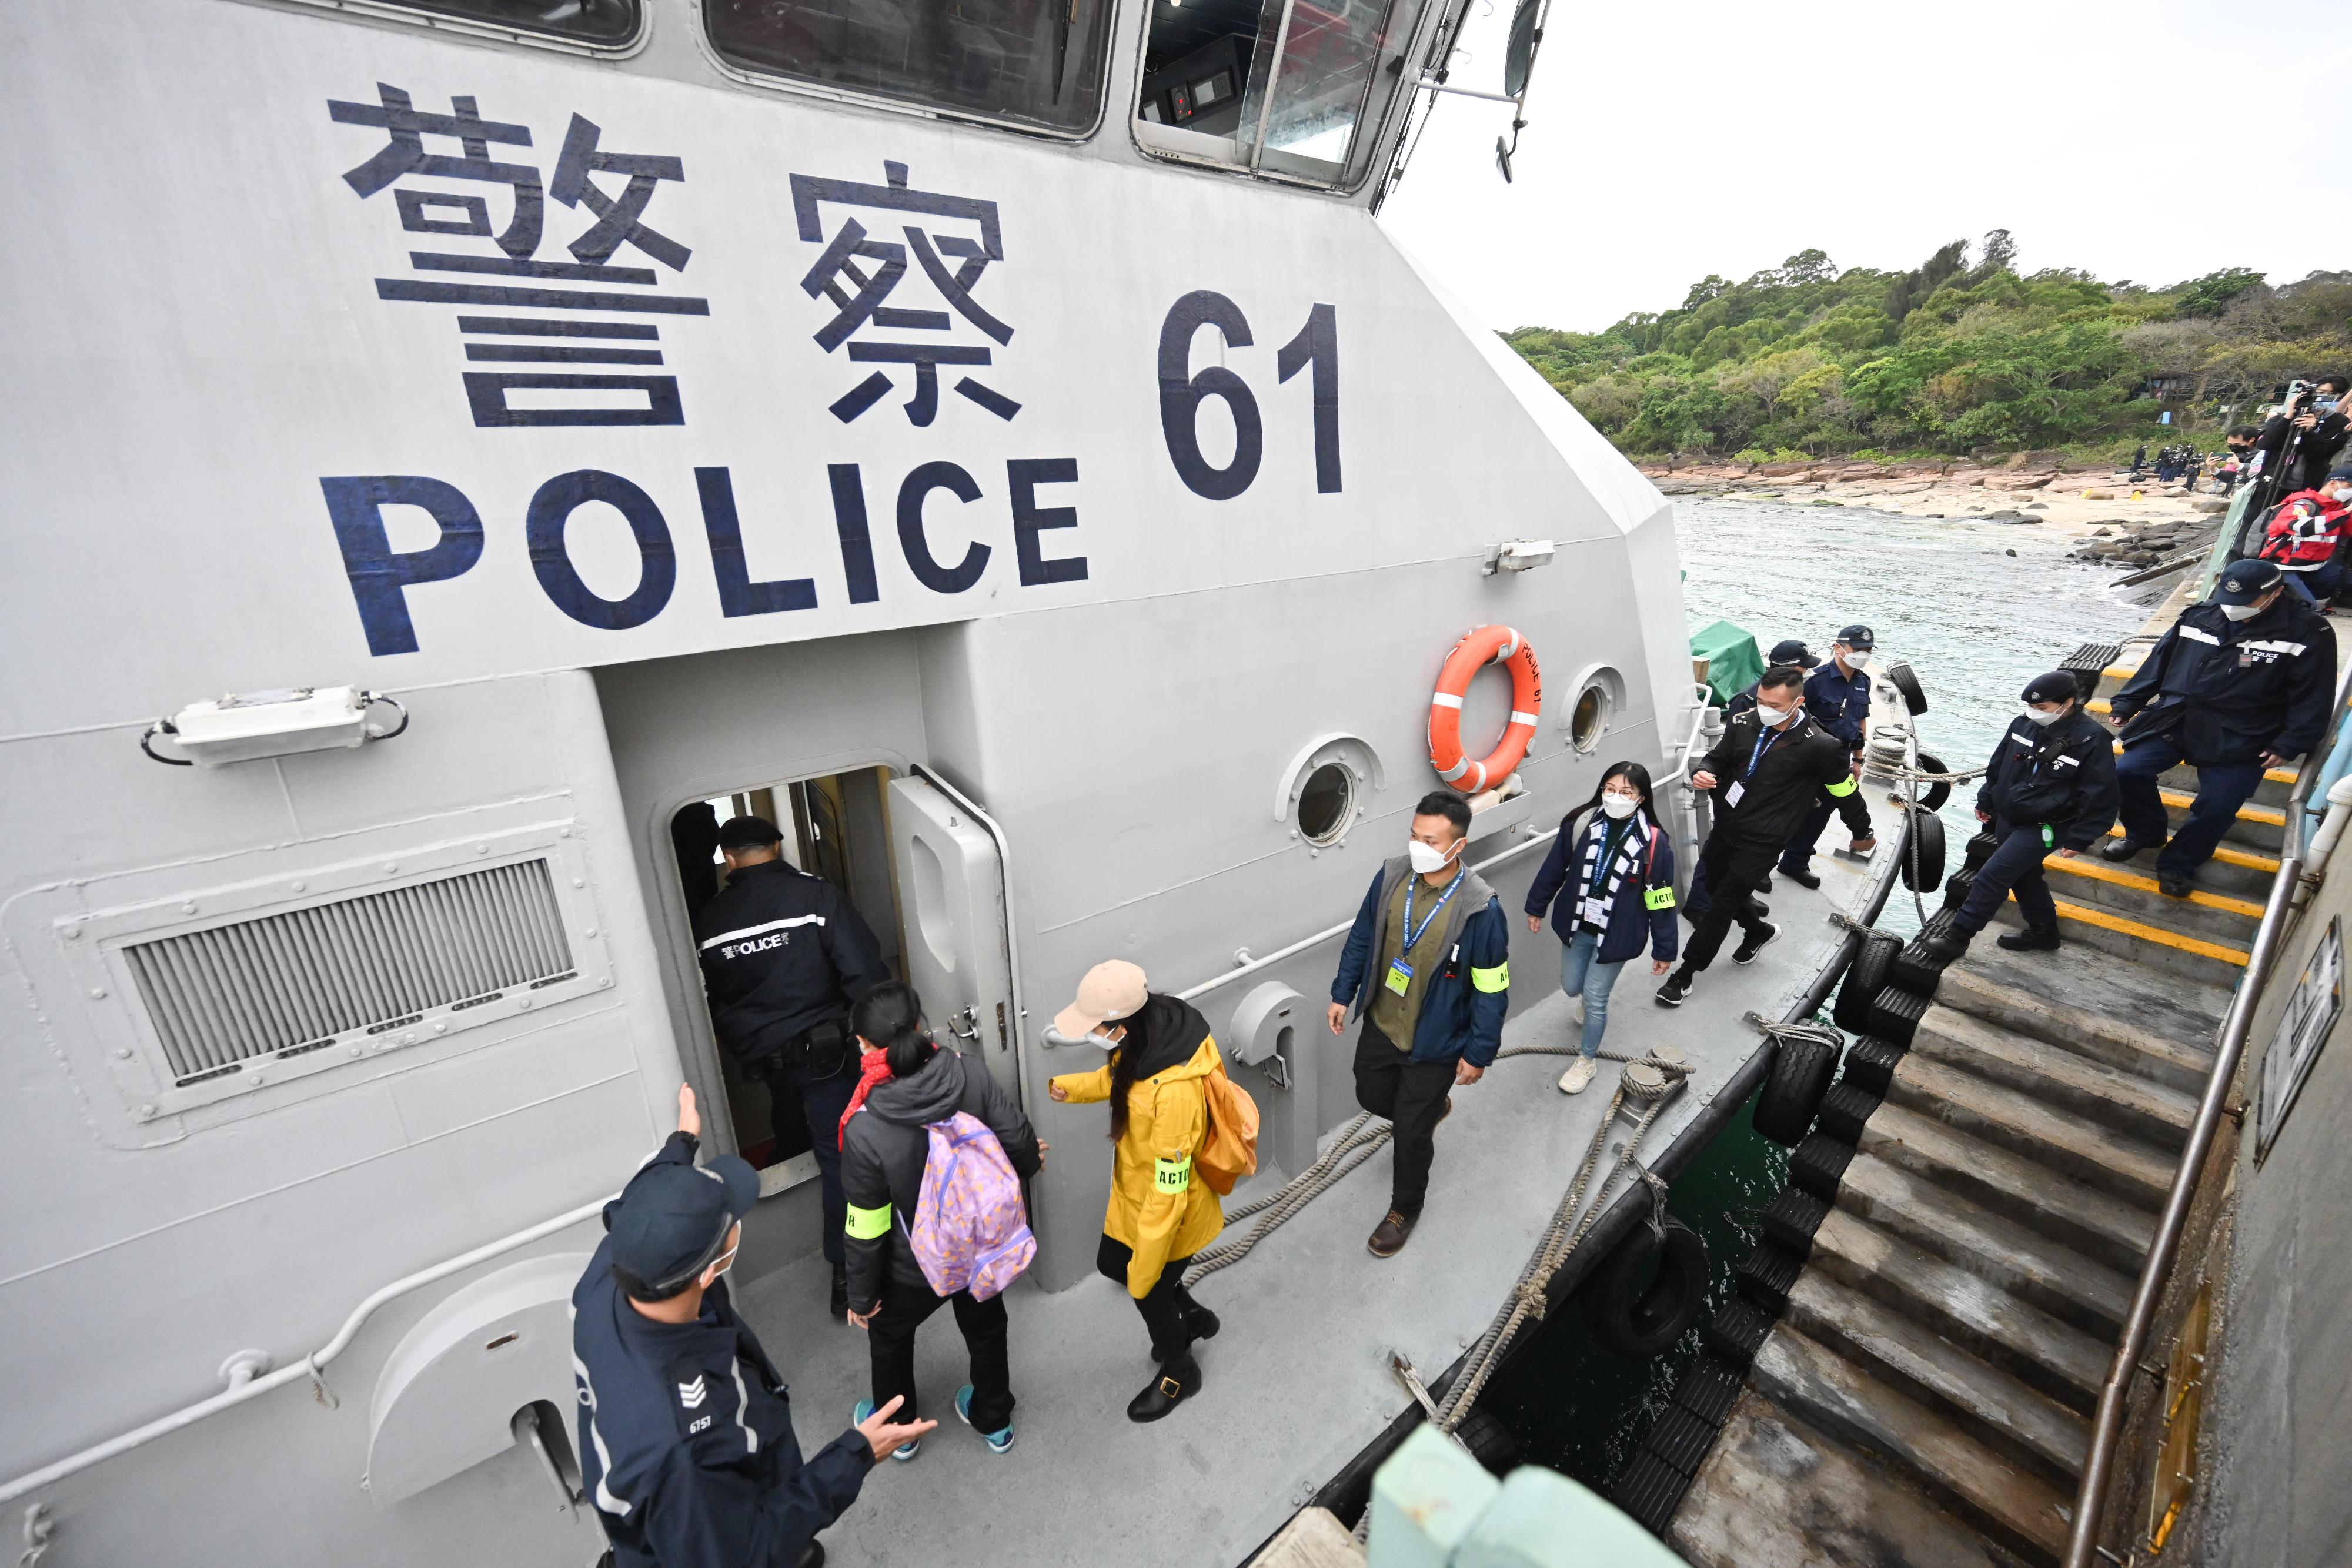 The Government conducted an inter-departmental exercise, "Checkerboard III", today (January 12). Photo shows evacuees boarding a police launch on Tung Ping Chau.